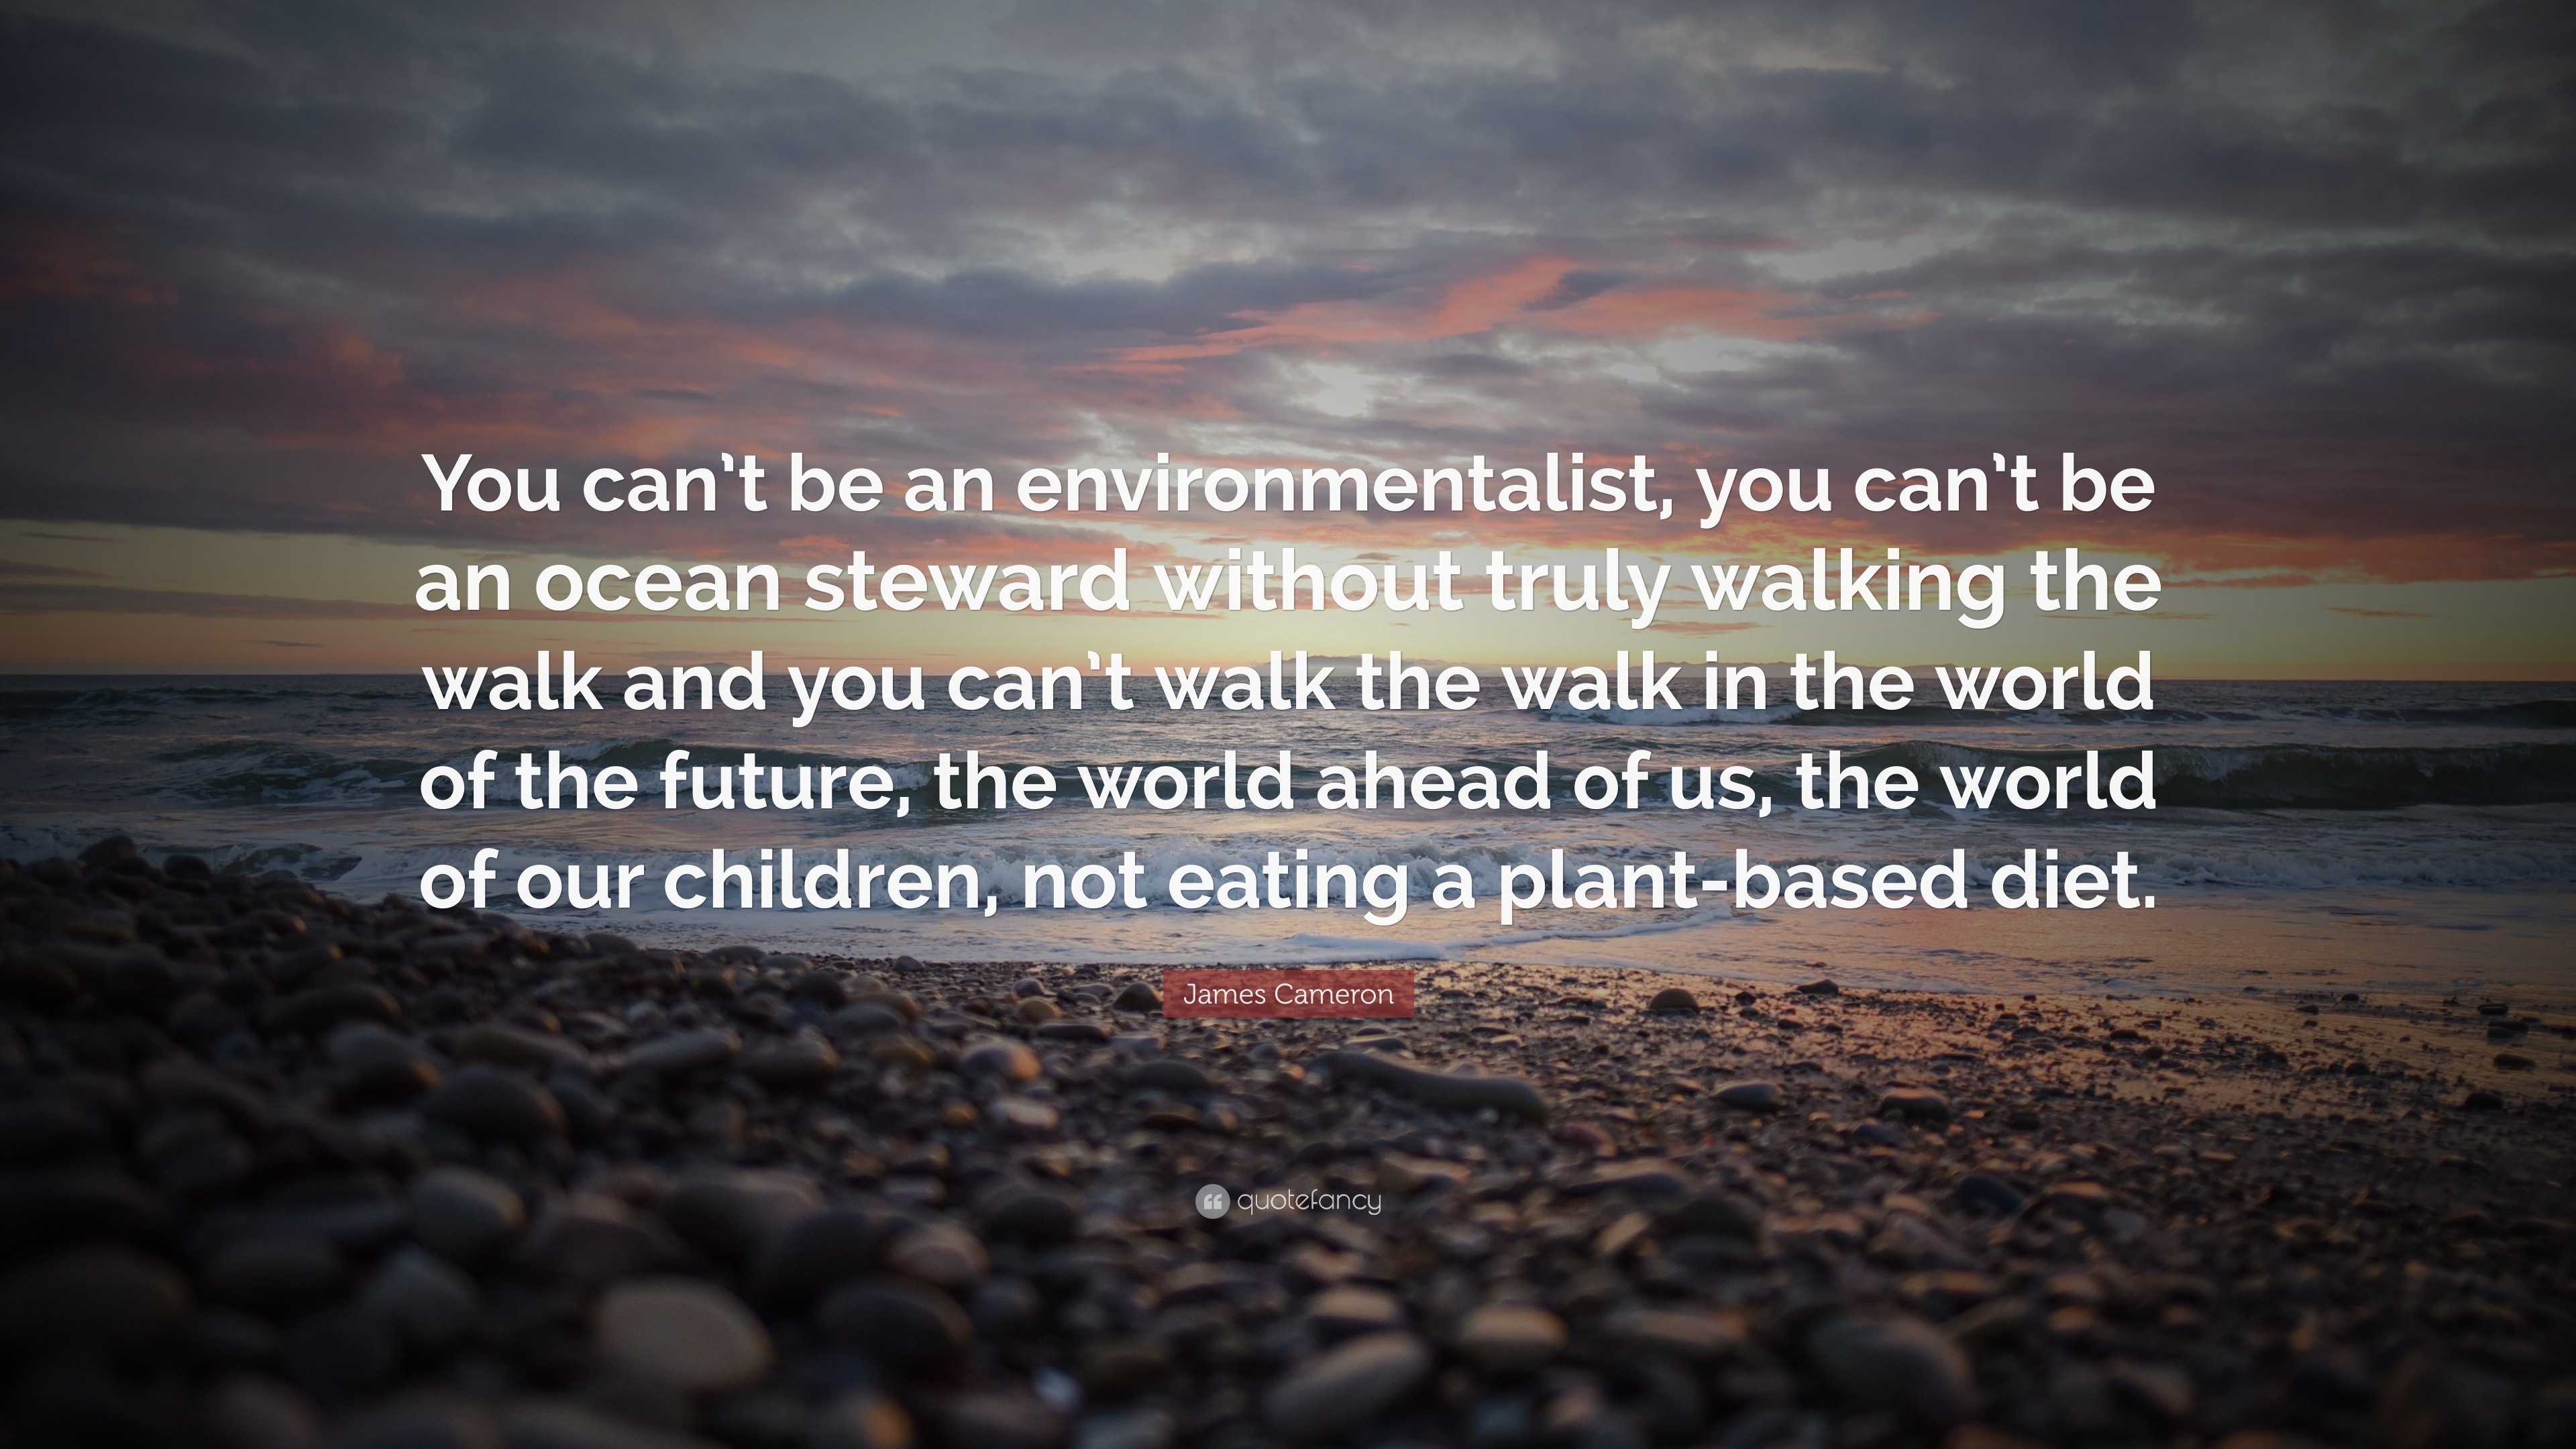 You can’t be an environmentalist, you can’t be an ocean steward without tru...